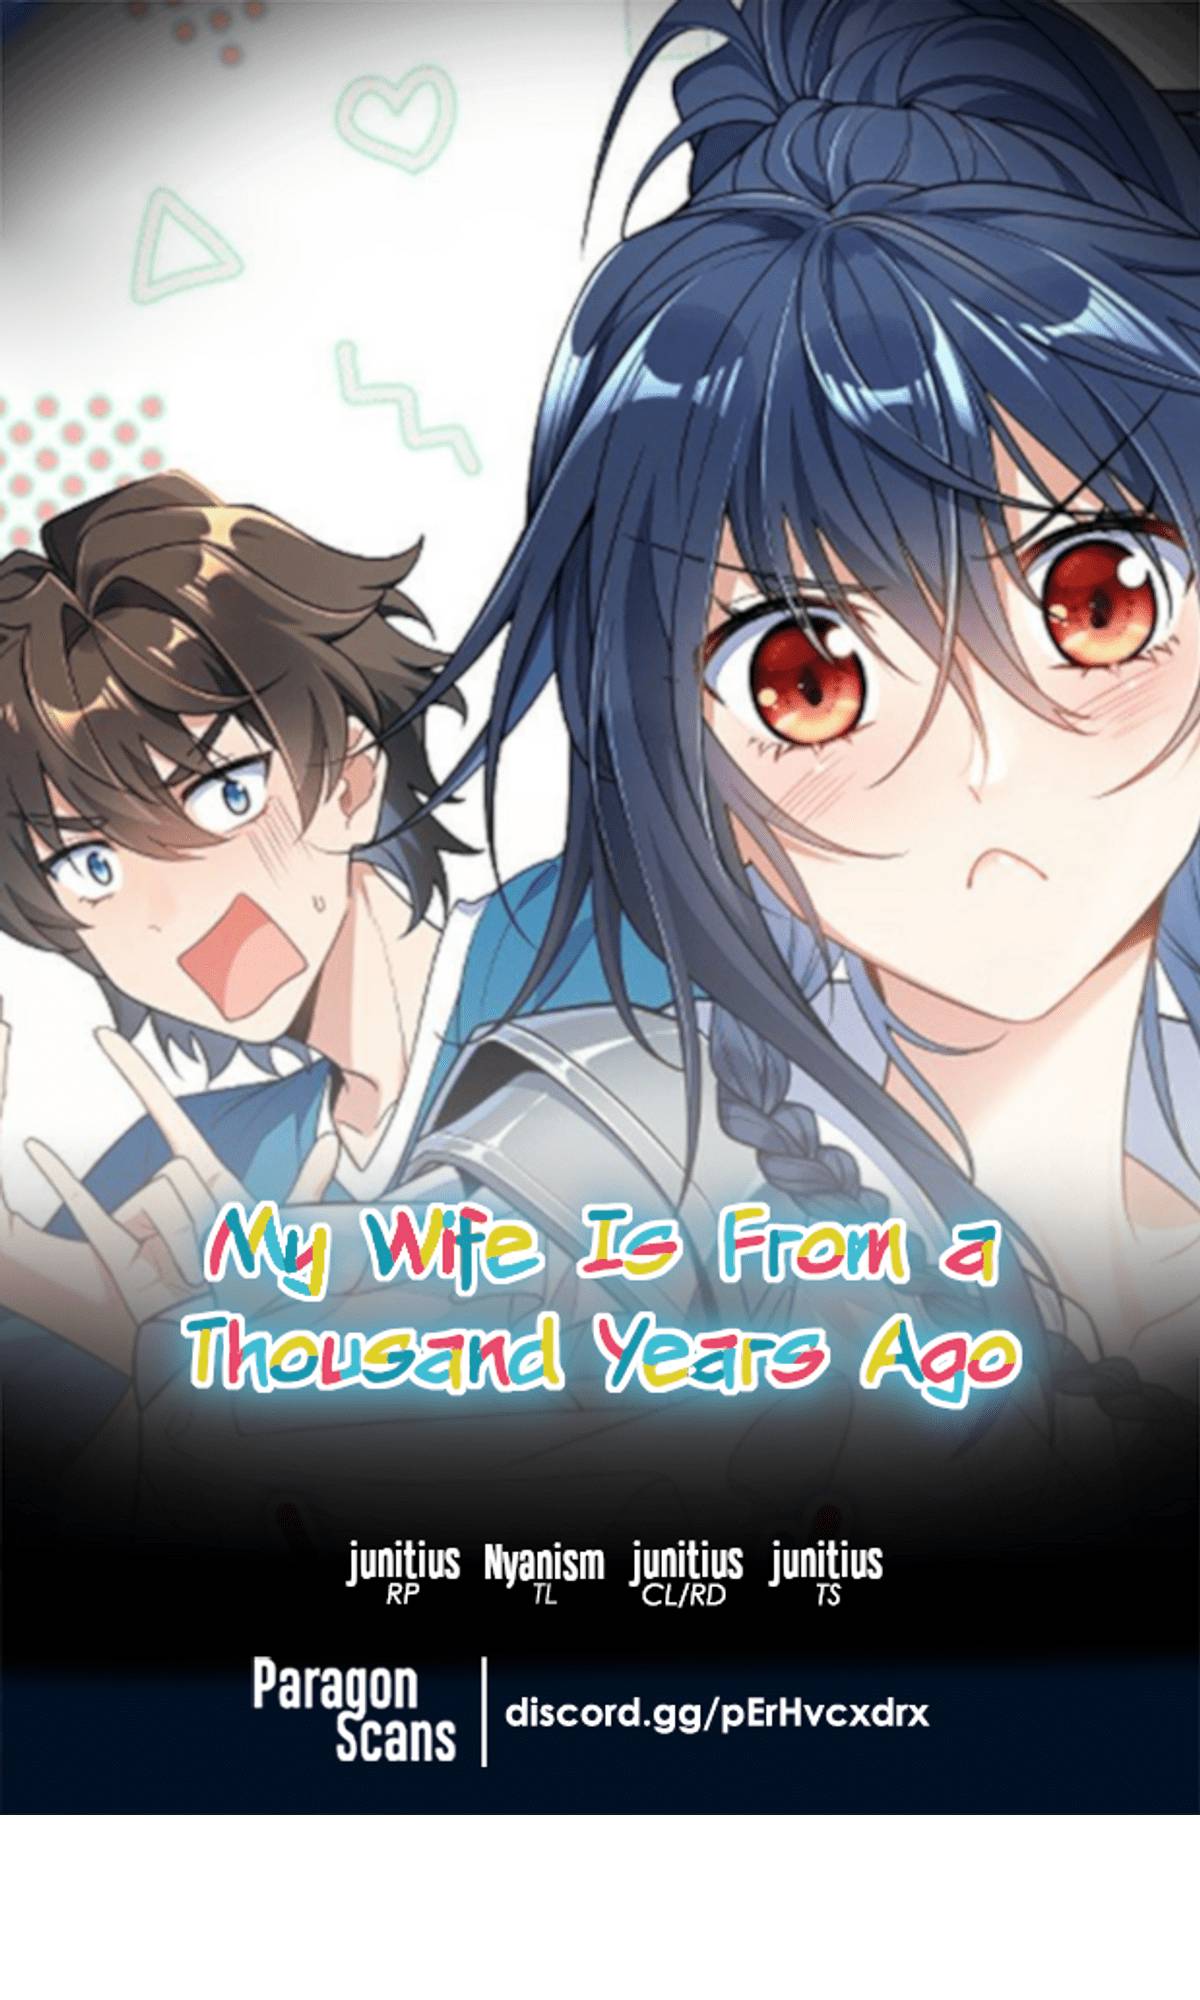 Read My Wife Is From a Thousand Years Ago Chapter 133 0